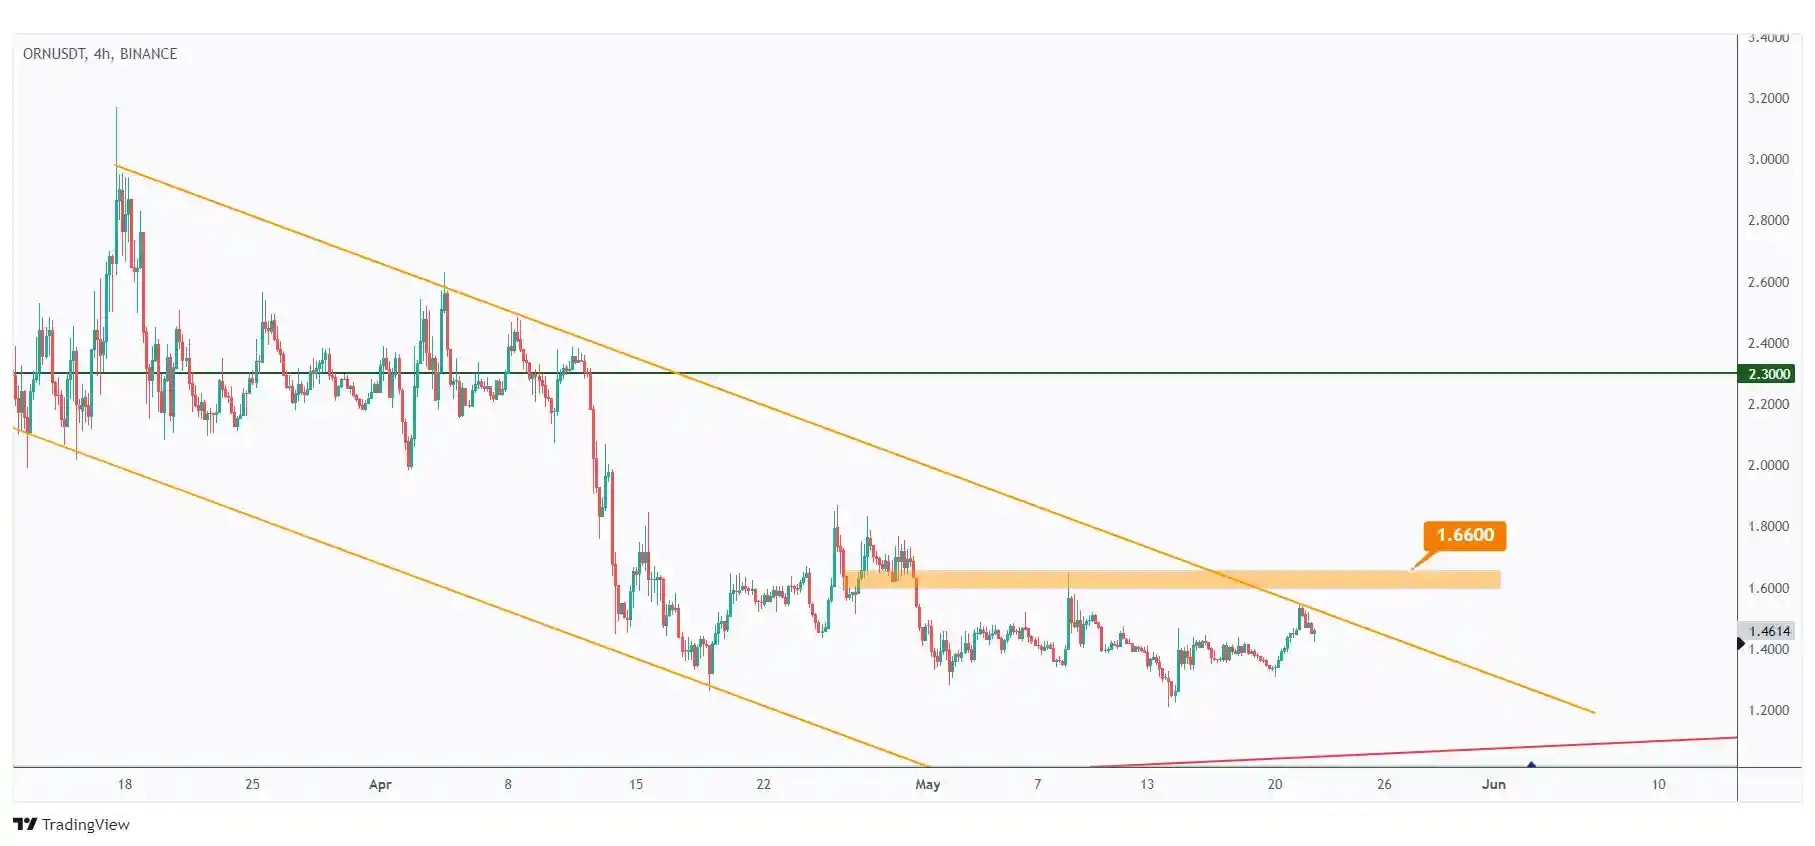 ORN 4h chart overall bearish trading within the falling channel and showing the last major high at $1.66 that we need a break above for the bulls to take over.